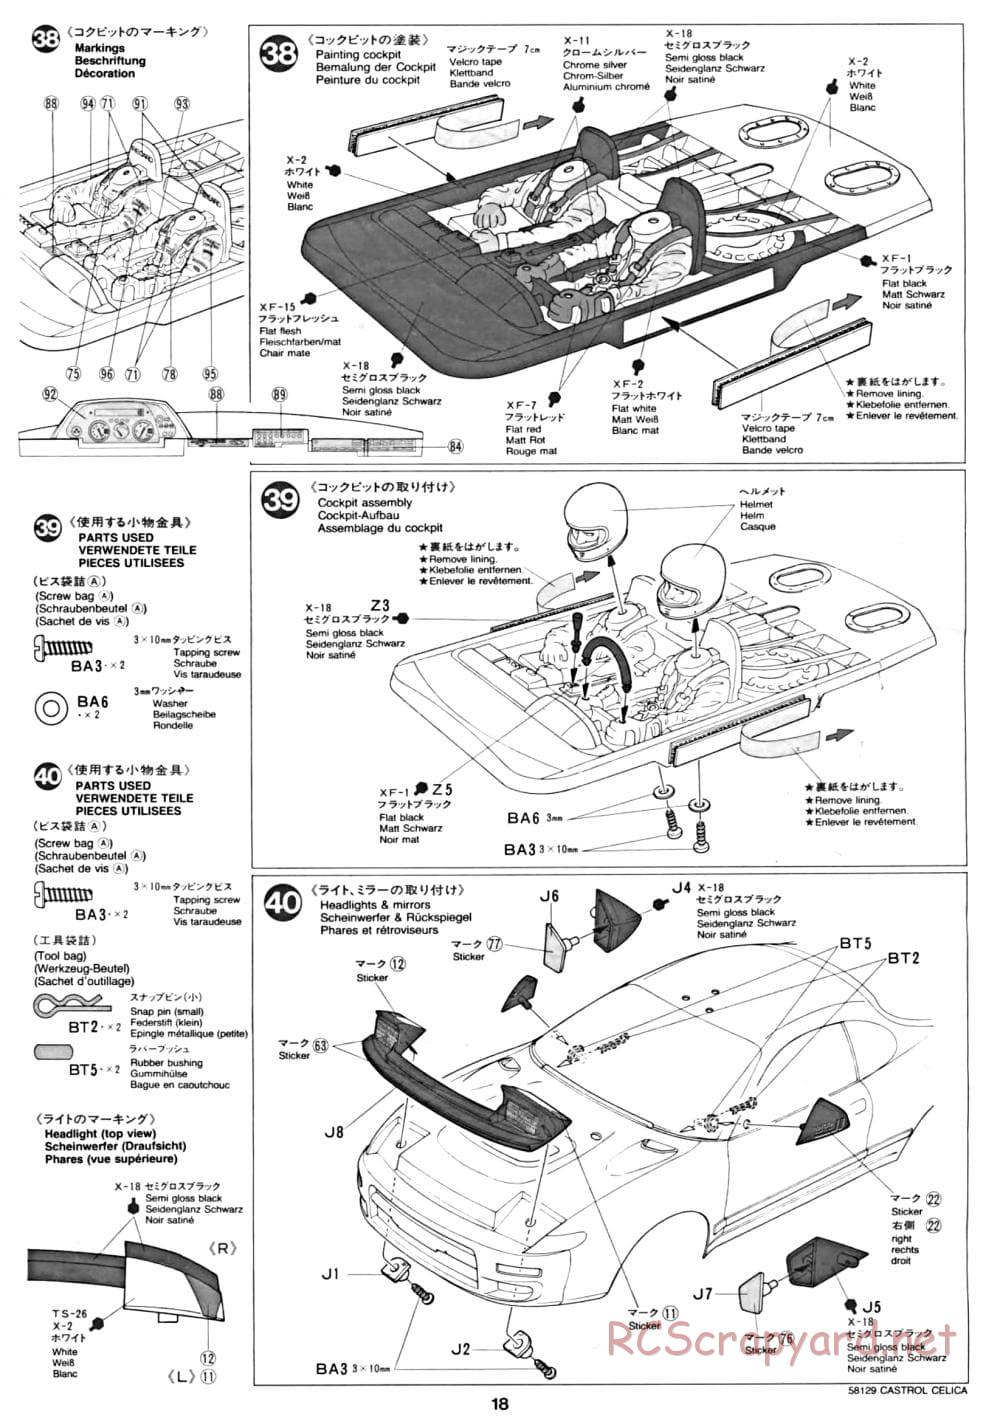 Tamiya - Castrol Celica 93 Monte-Carlo - TA-02 Chassis - Manual - Page 18